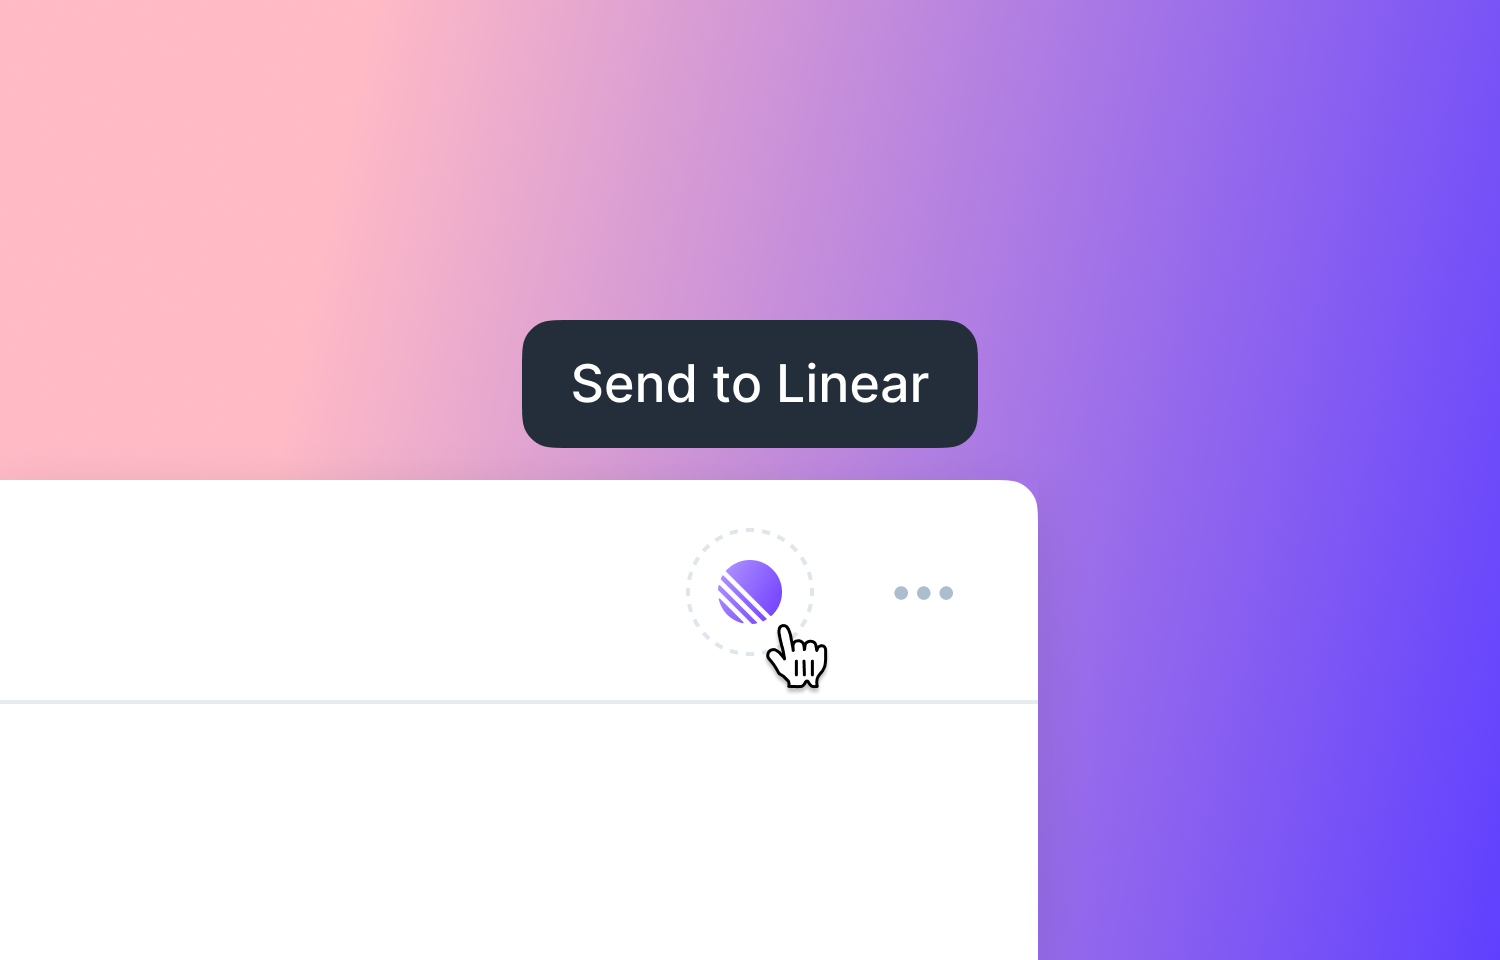 Userback interface showing a "send to Linear" button